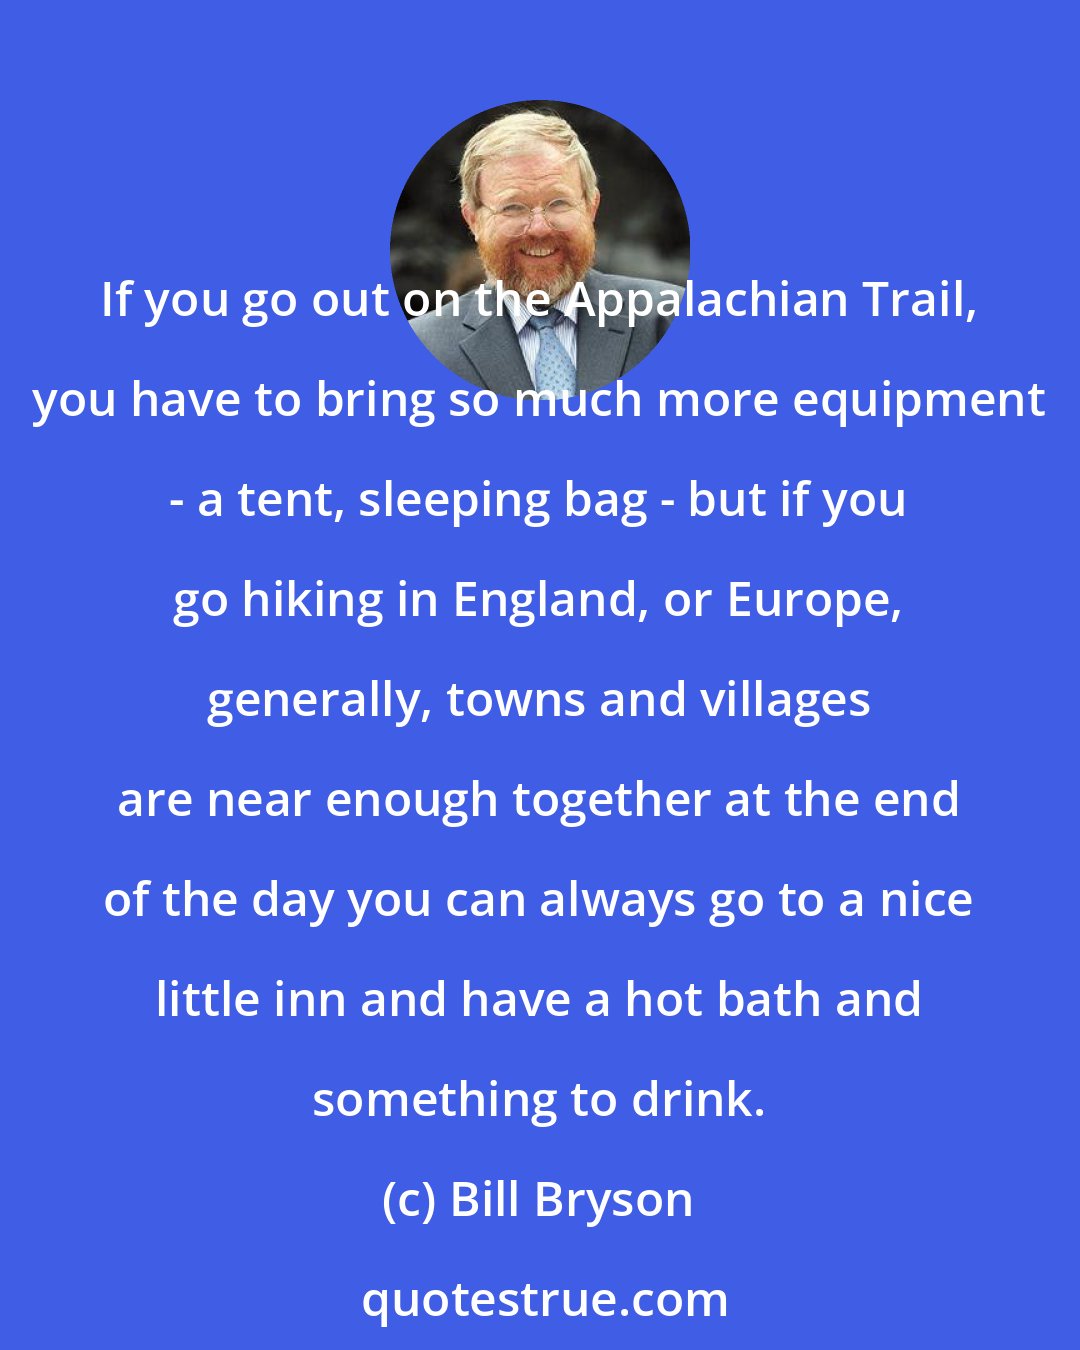 Bill Bryson: If you go out on the Appalachian Trail, you have to bring so much more equipment - a tent, sleeping bag - but if you go hiking in England, or Europe, generally, towns and villages are near enough together at the end of the day you can always go to a nice little inn and have a hot bath and something to drink.